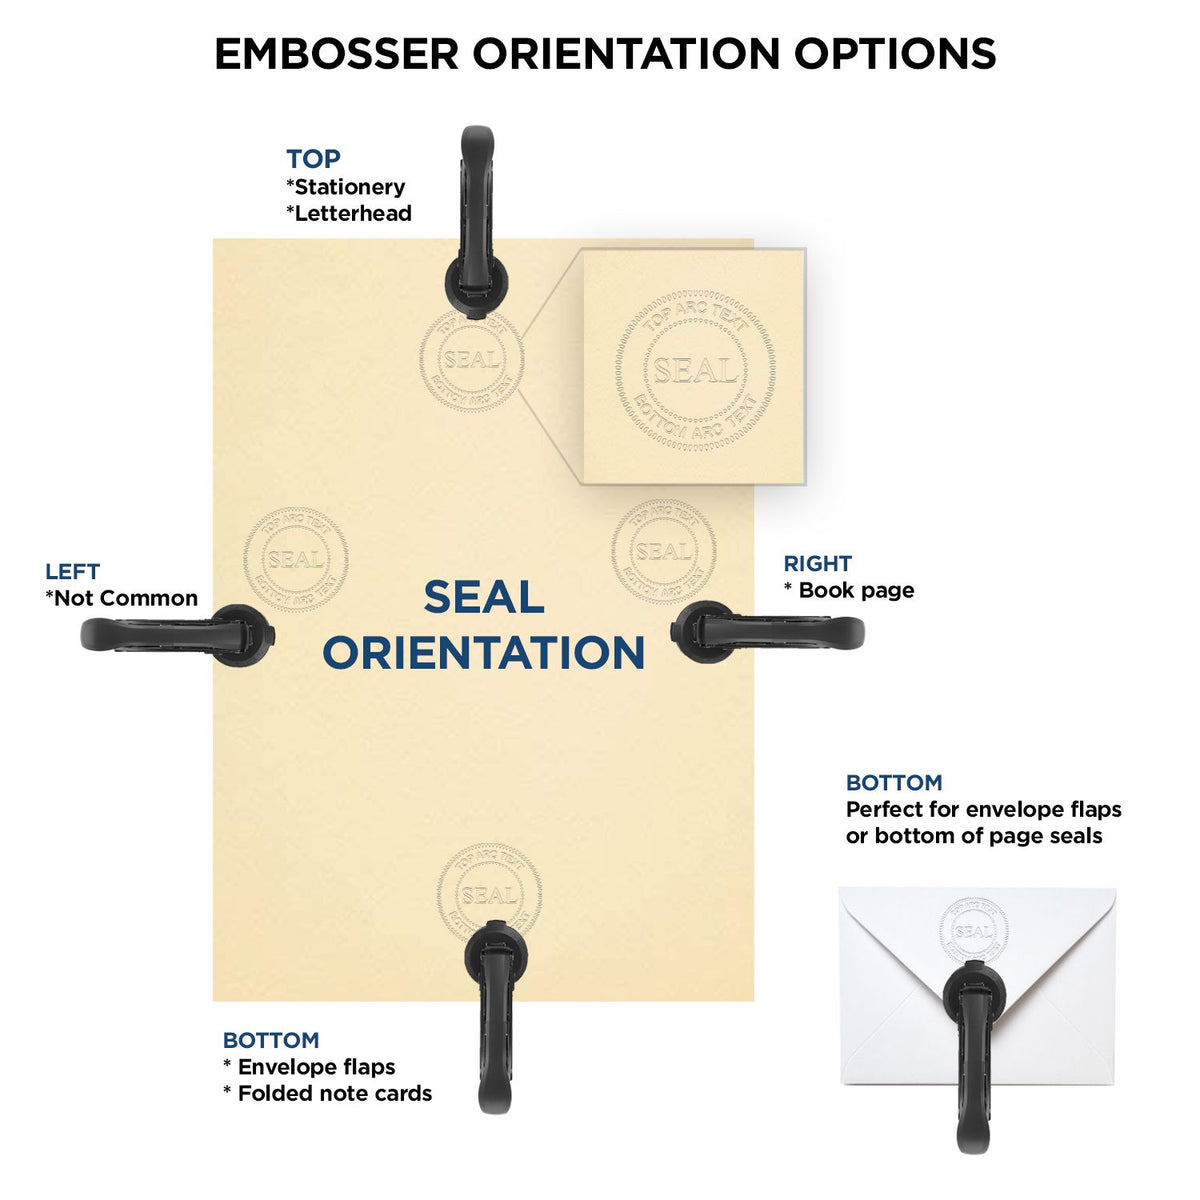 An infographic for the Handheld Maine Professional Geologist Embosser showing embosser orientation, this is showing examples of a top, bottom, right and left insert.